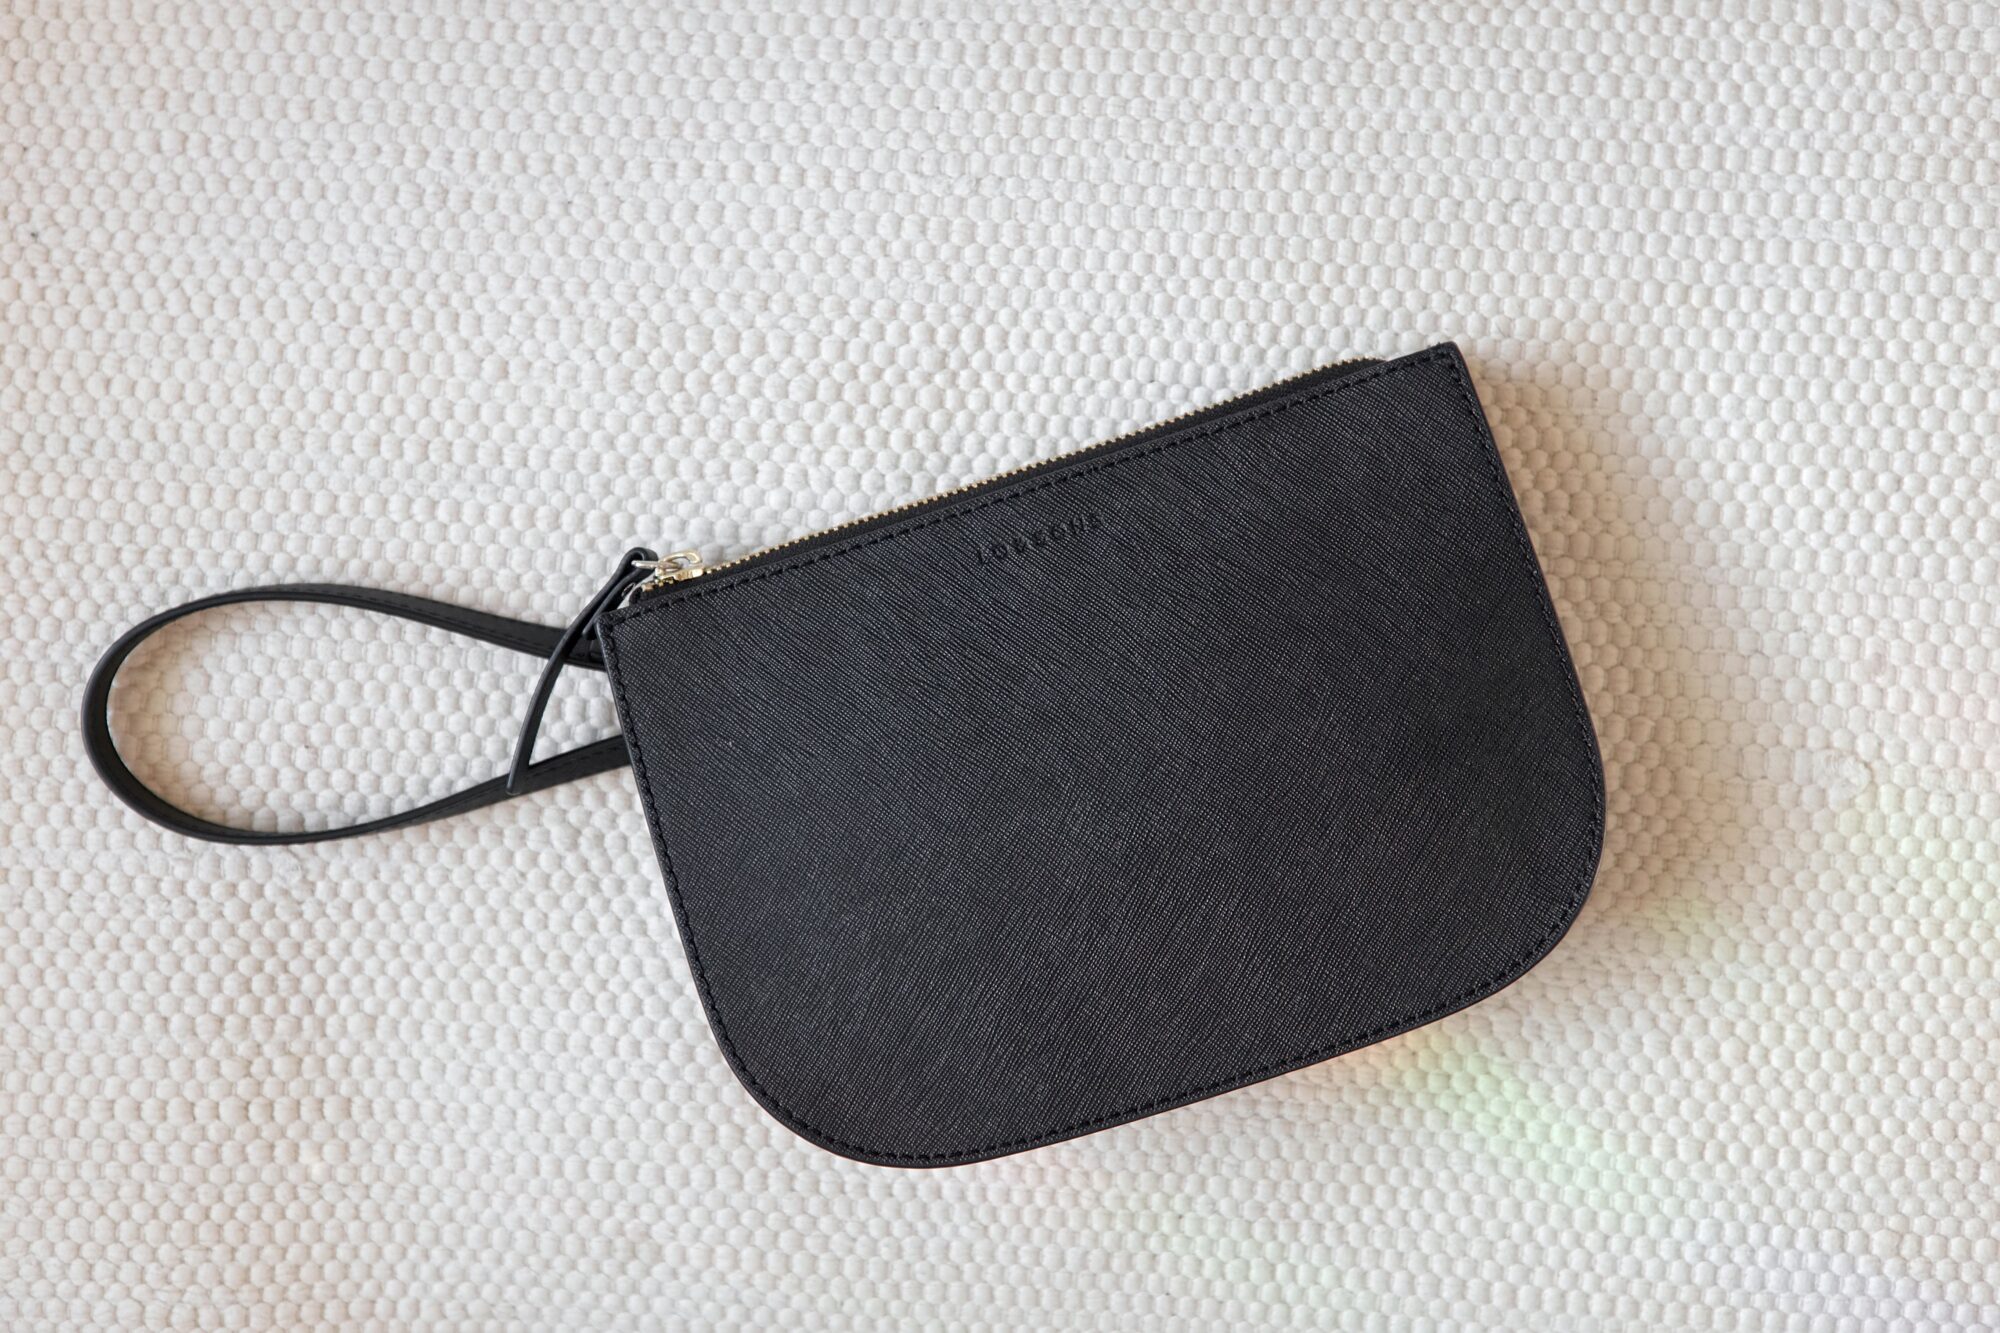 A bag from Lo & Sons